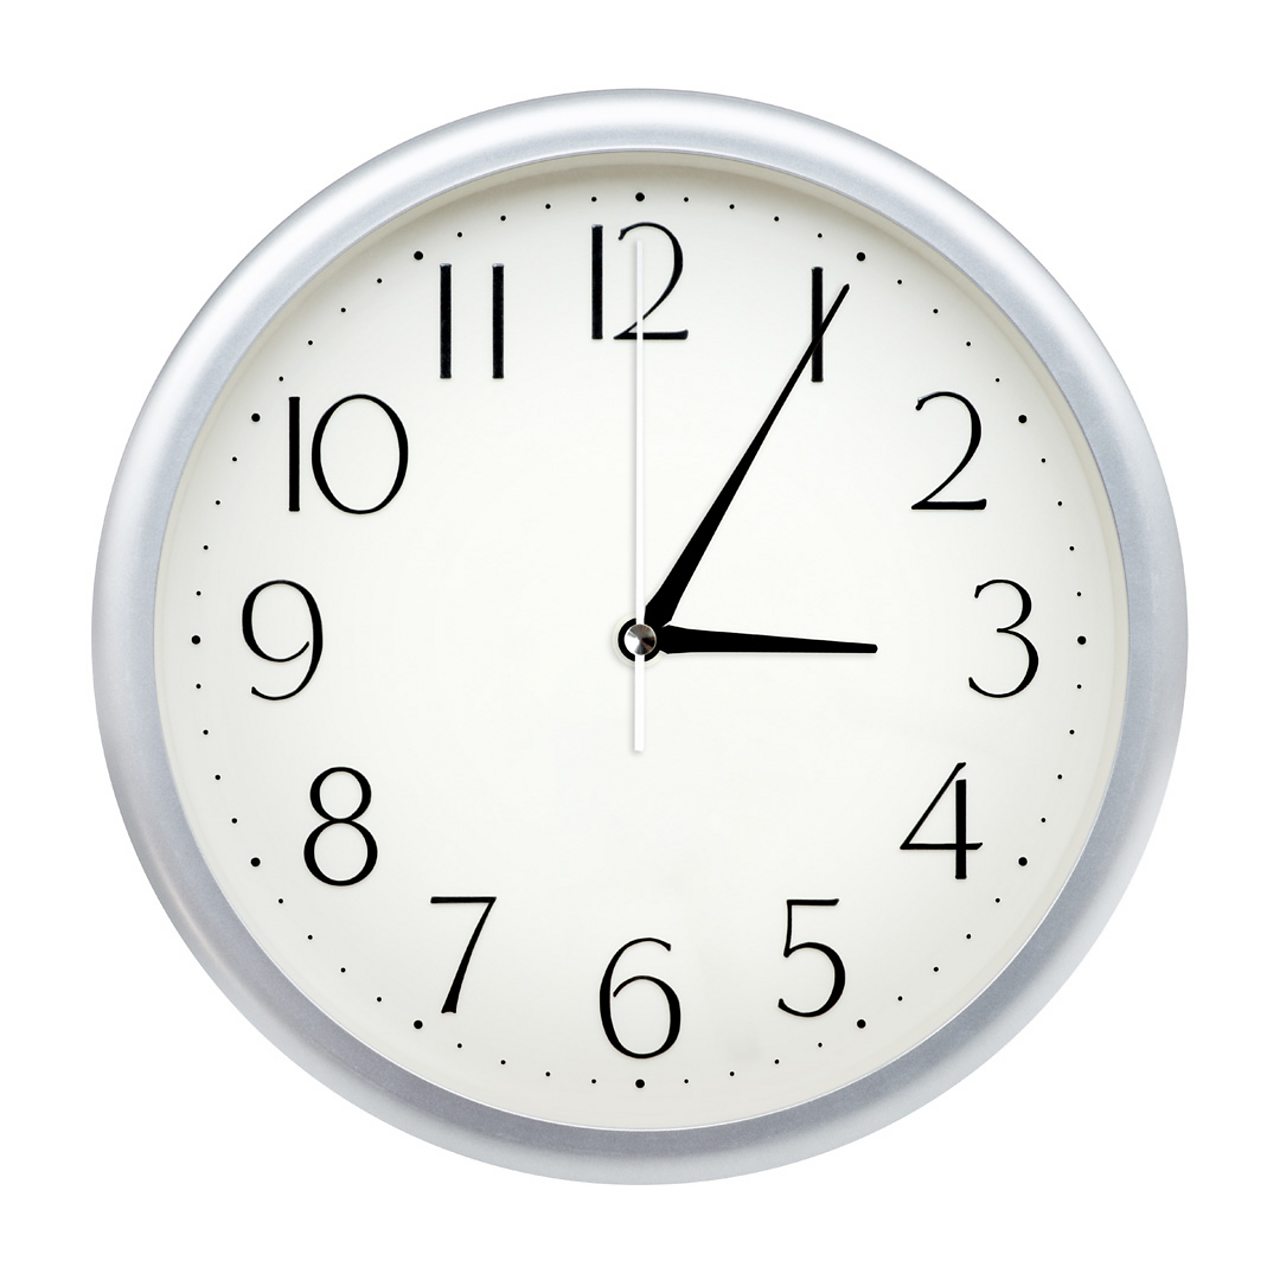 Image of a clock face showing 3.05